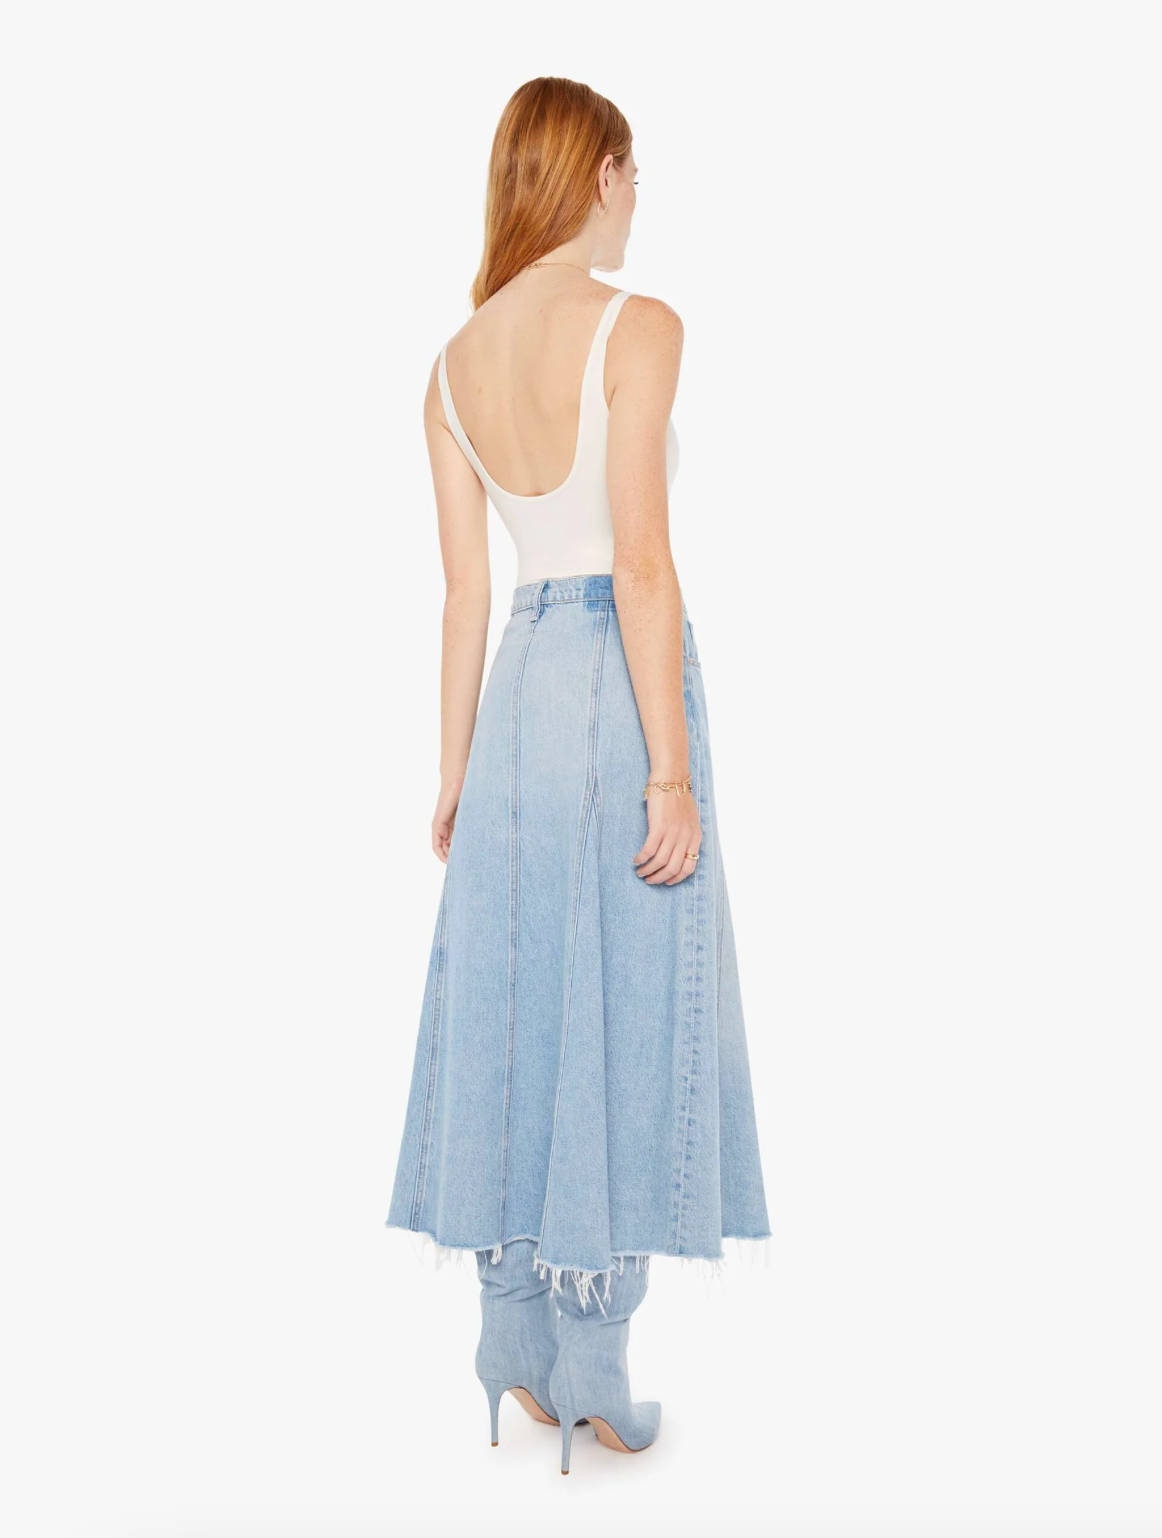 The woman is wearing The Full Swing I&#39;m With The Band tank top with a long blue denim skirt with frayed edges, paired with blue high-heeled shoes styled for an Arizona look. She is standing on a plain white background.